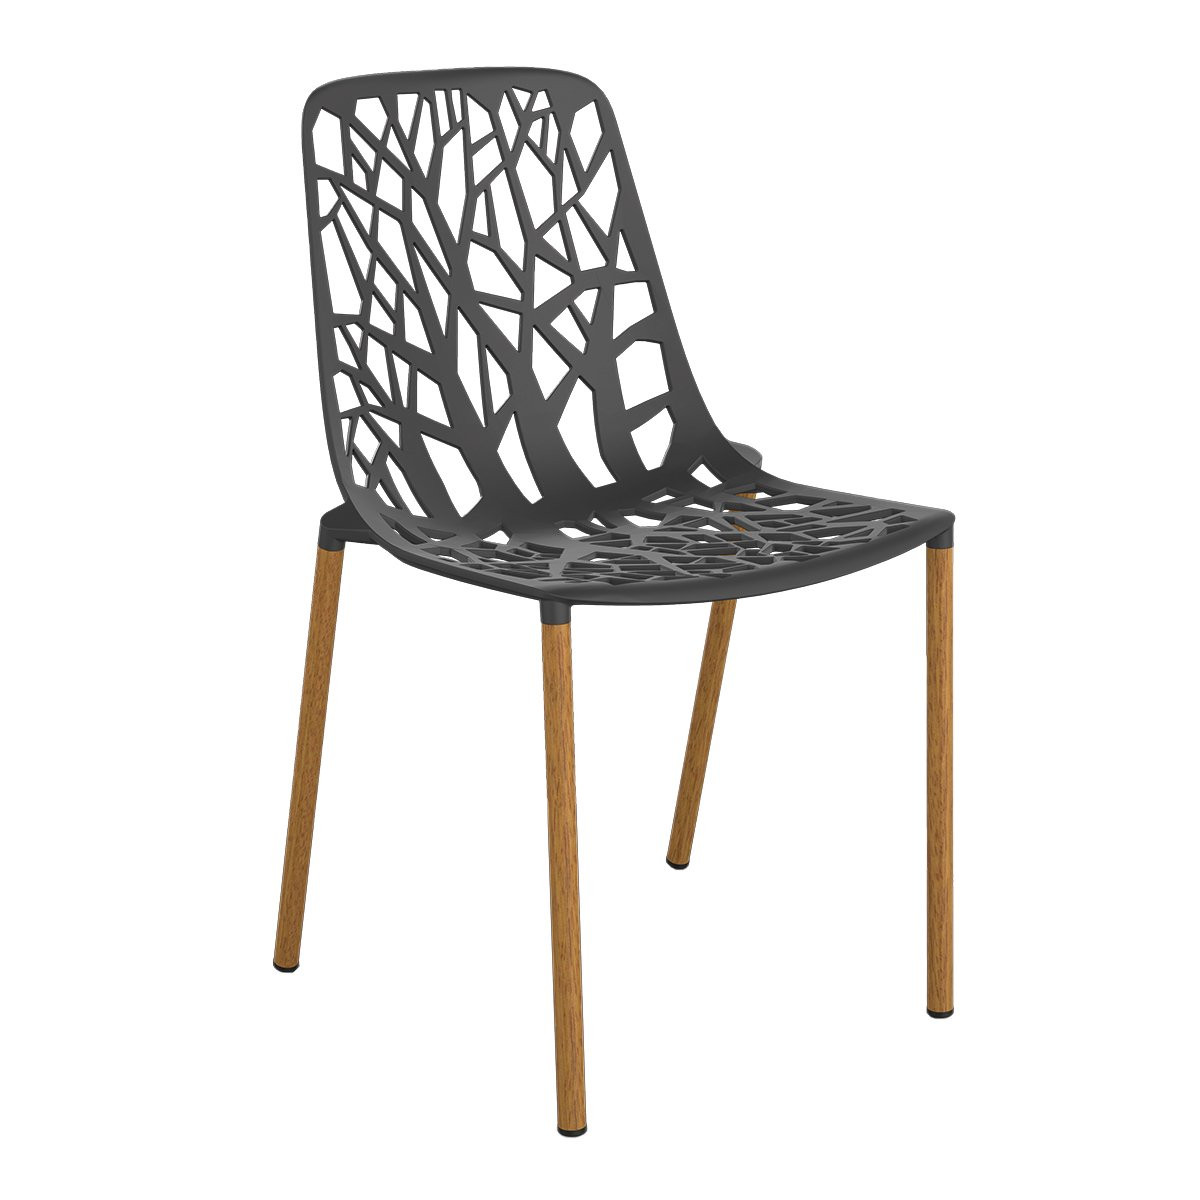 Fast Forest Chair Iroko - donker blauw